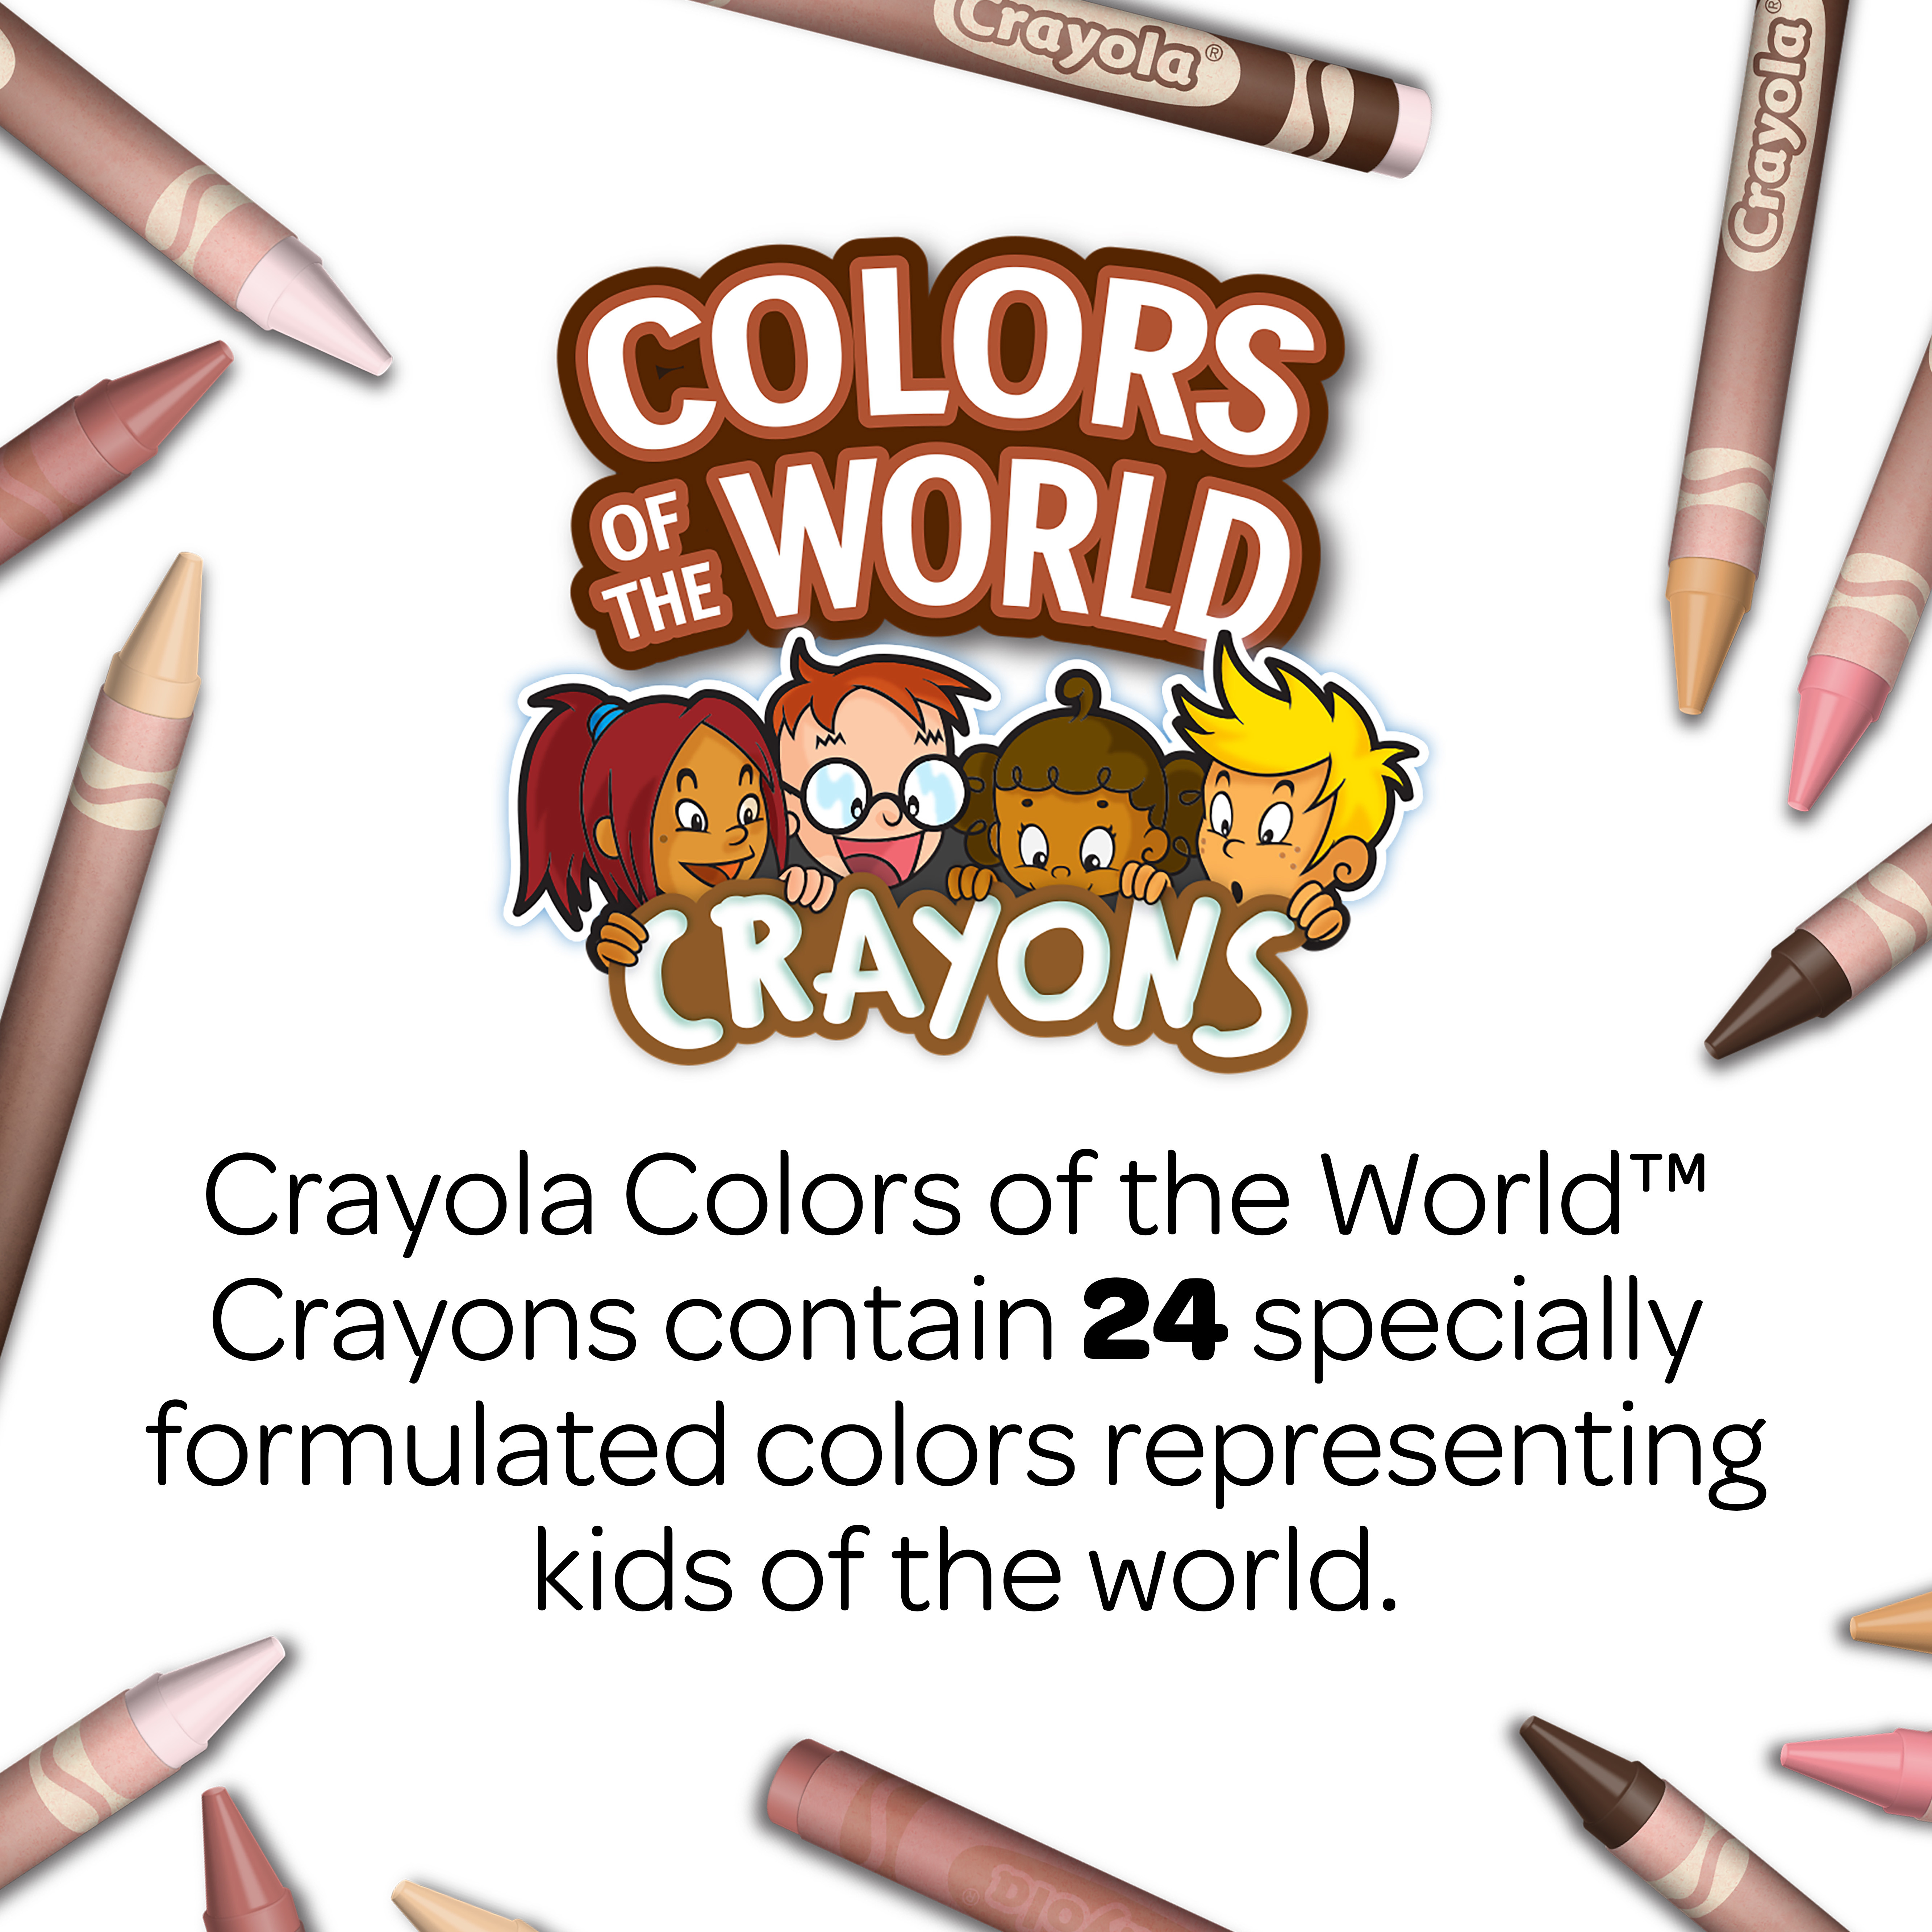 Crayola Crayon & Storage Tub, School Supplies, 168 Ct, with Colors of the World Crayons, Holiday Gift for Kids - image 9 of 9